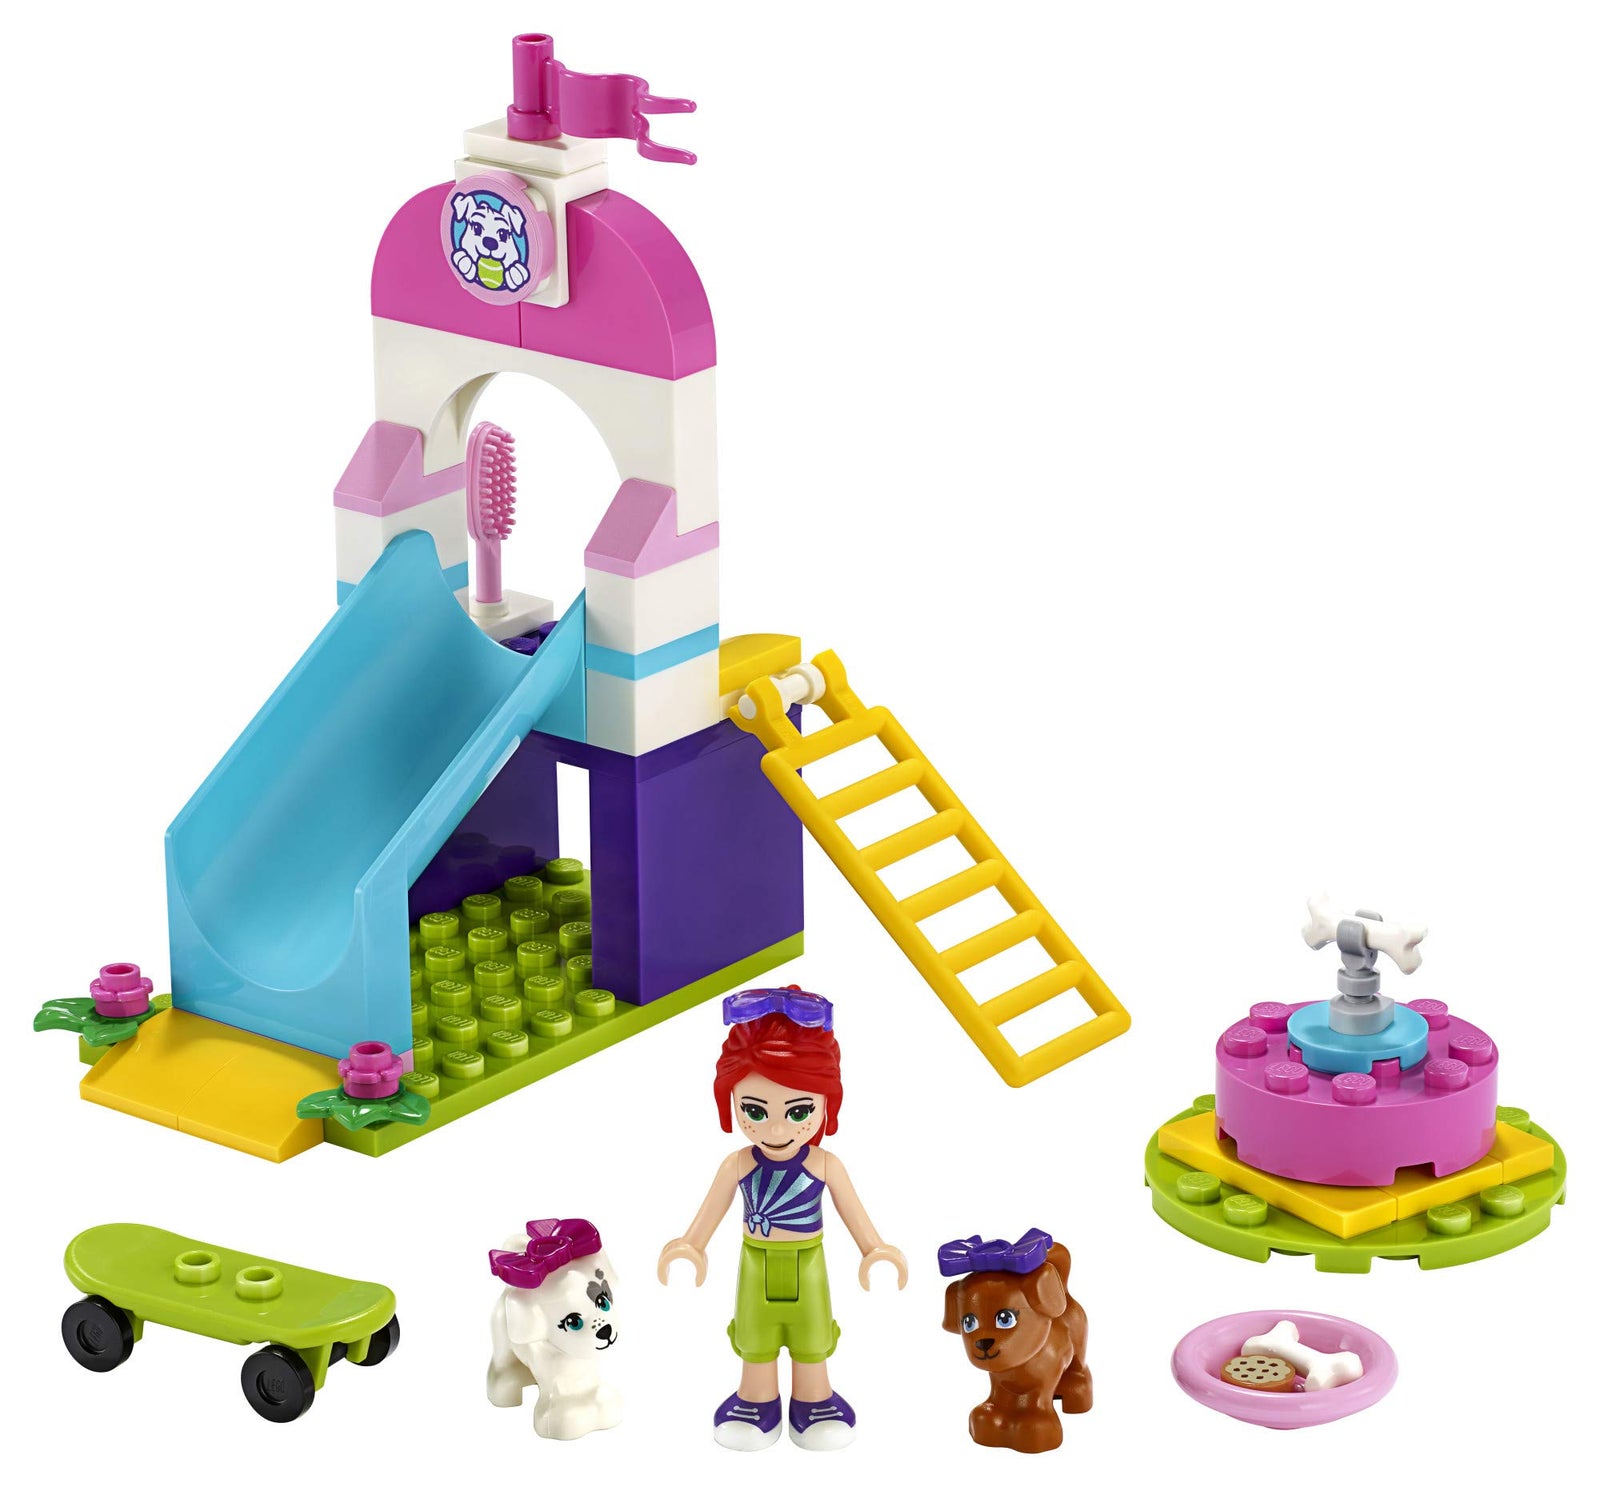 LEGO Friends Puppy Playground 41396 Starter Building Kit; Best Animal Toy Featuring Friends Character Mia (57 Pieces)